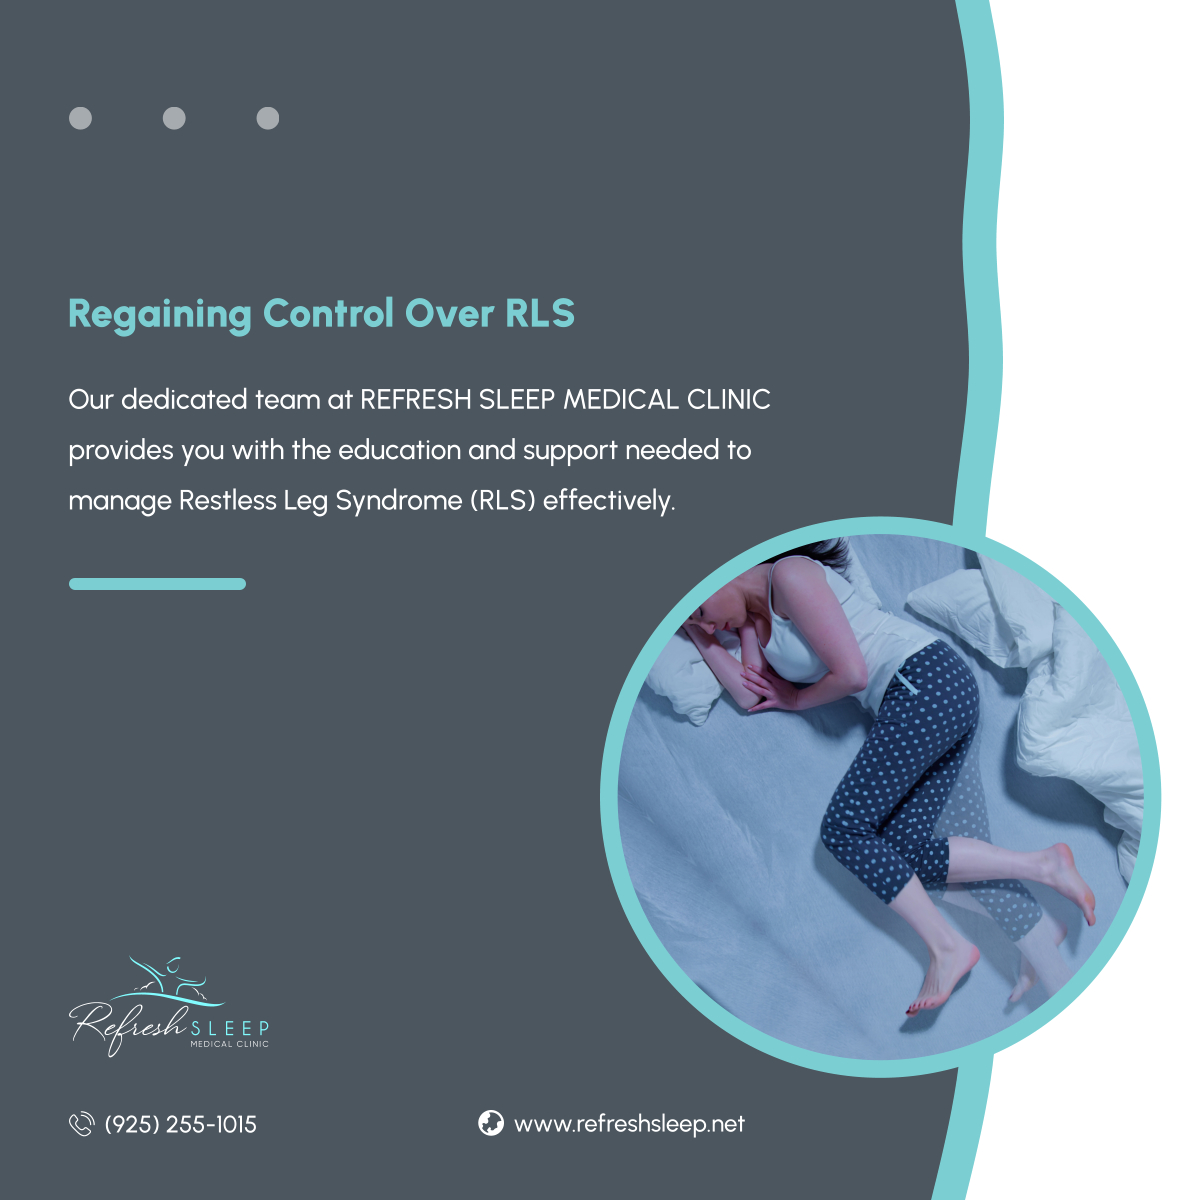 Restless Leg Syndrome can disrupt your sleep and life, but it doesn't have to. Discover how personalized care and understanding can bring back the tranquility of restful nights. 

#PleasantonCA #AdultAndChildSleepClinic #RLS #RestfulSleep #QualityOfLife